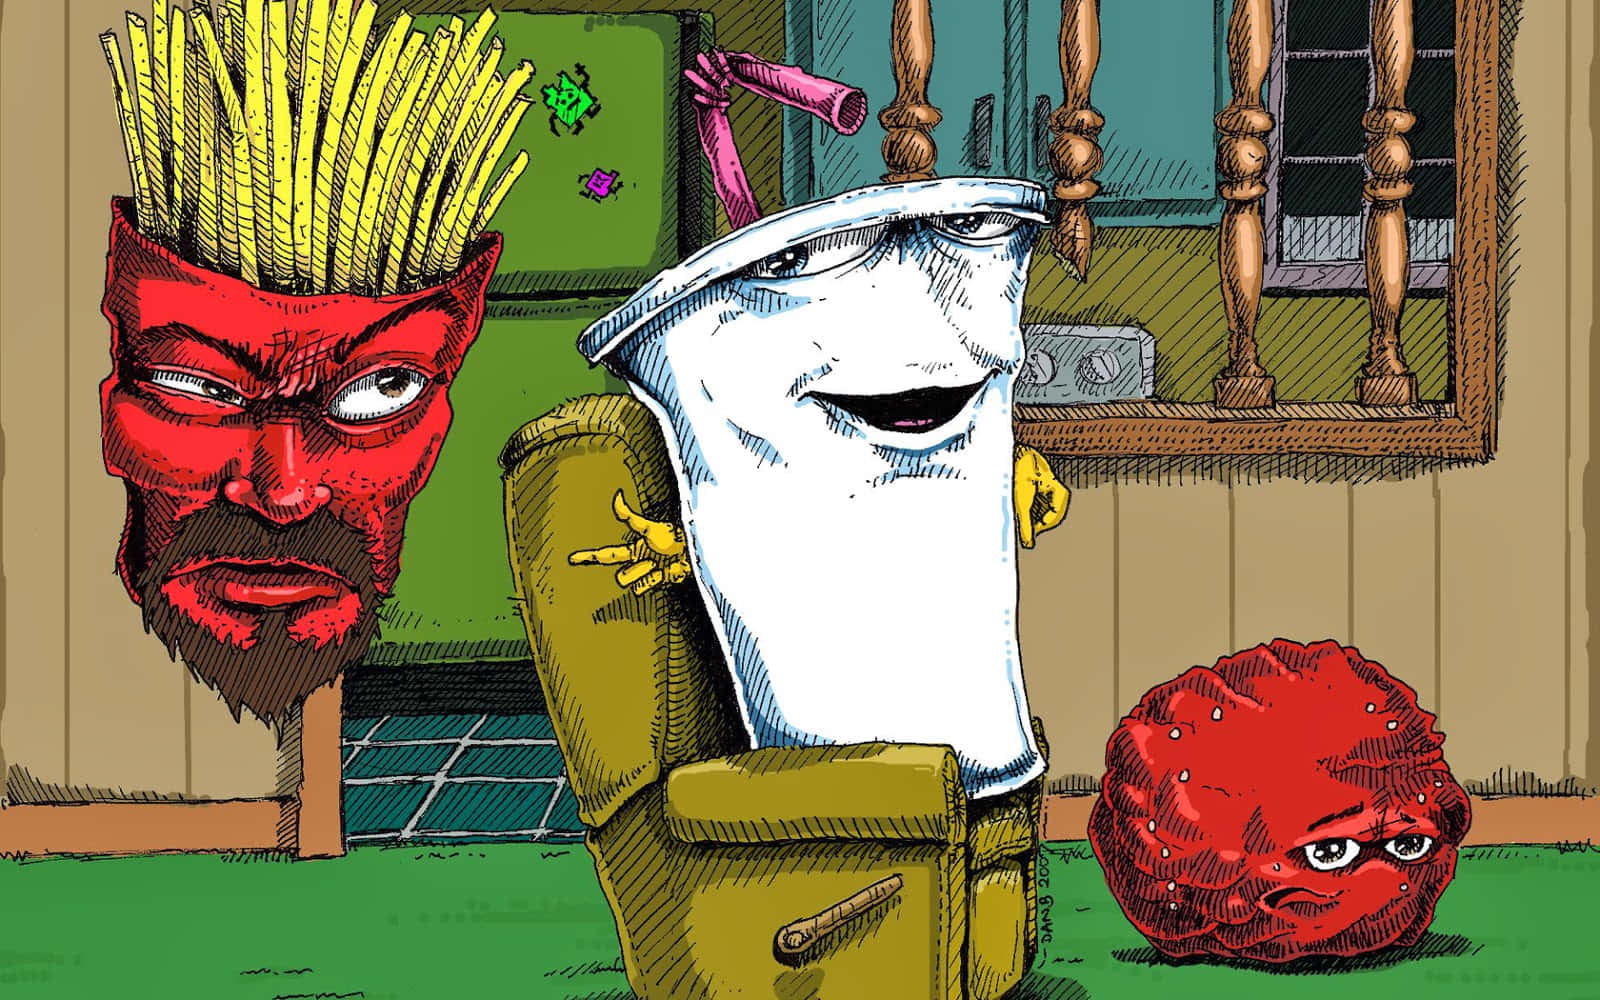 The zany trio of Aqua Teen Hunger Force in their iconic setting